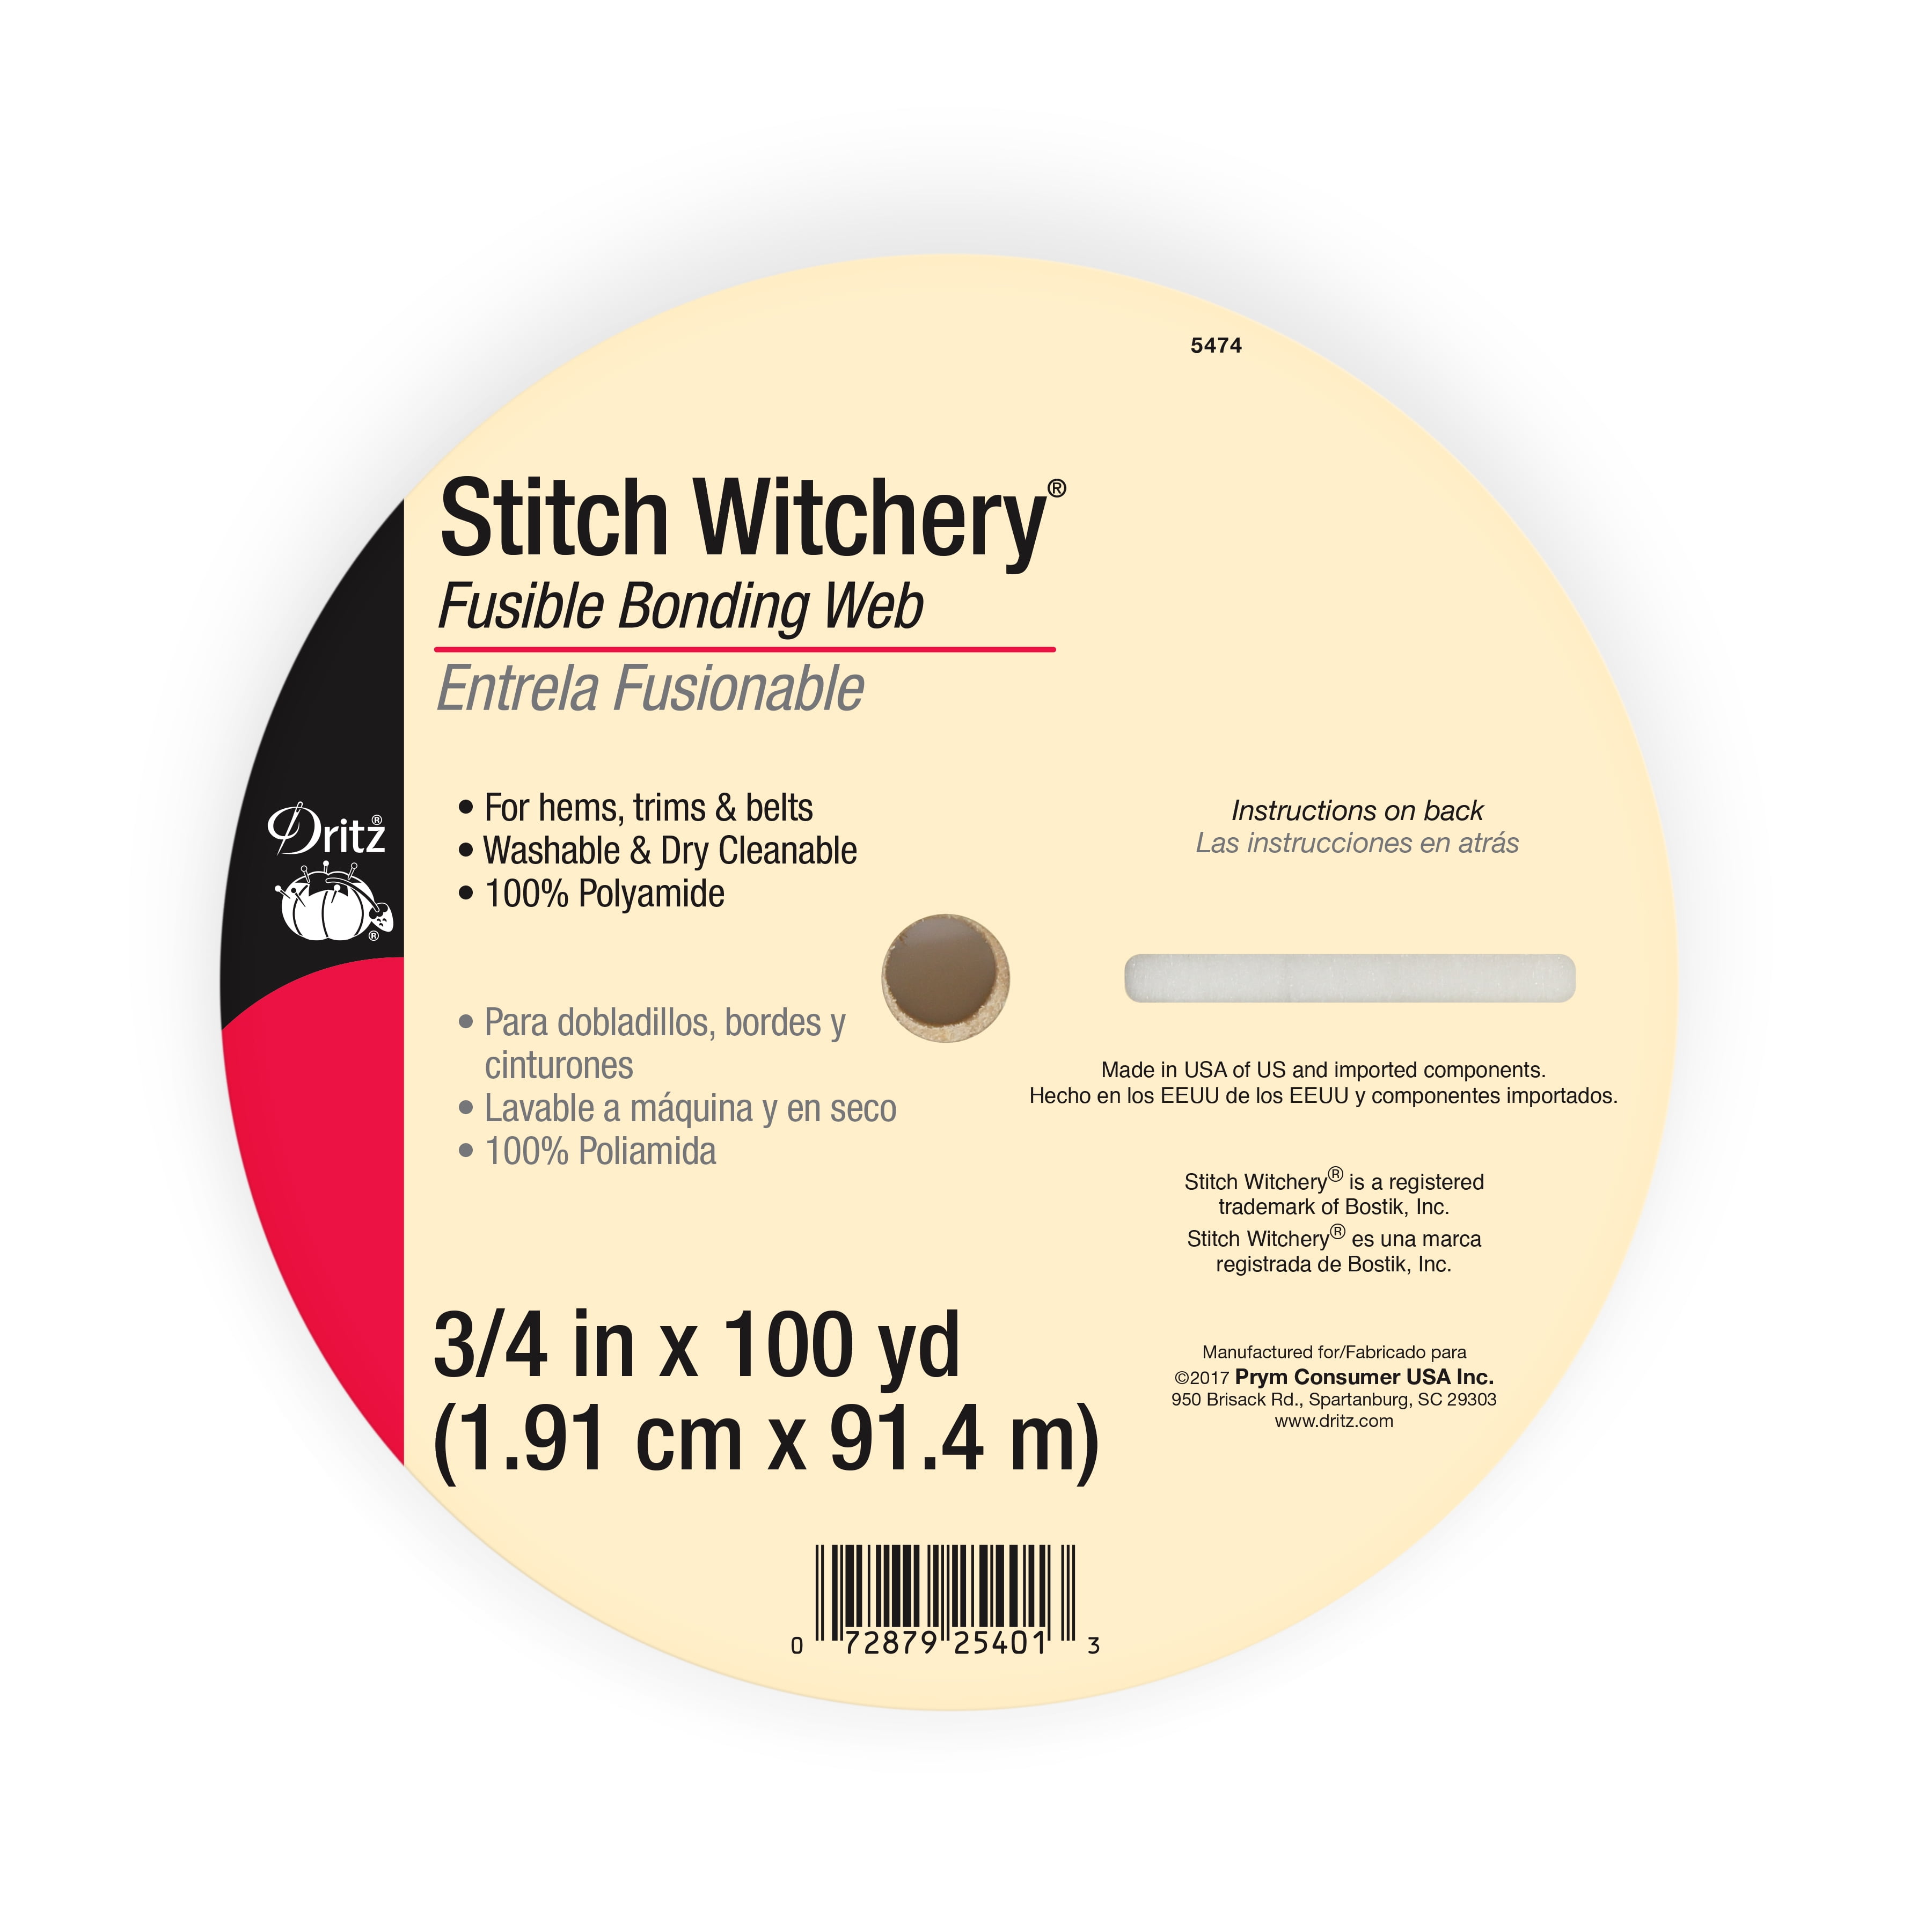 Stitch Witchery 50 Sheets, 8.5 x 12 Fusible Webbing for Fabric Applique,  Medium Weight Fusible Interfacing, Stitch Witchery Fusible Bonding Web for